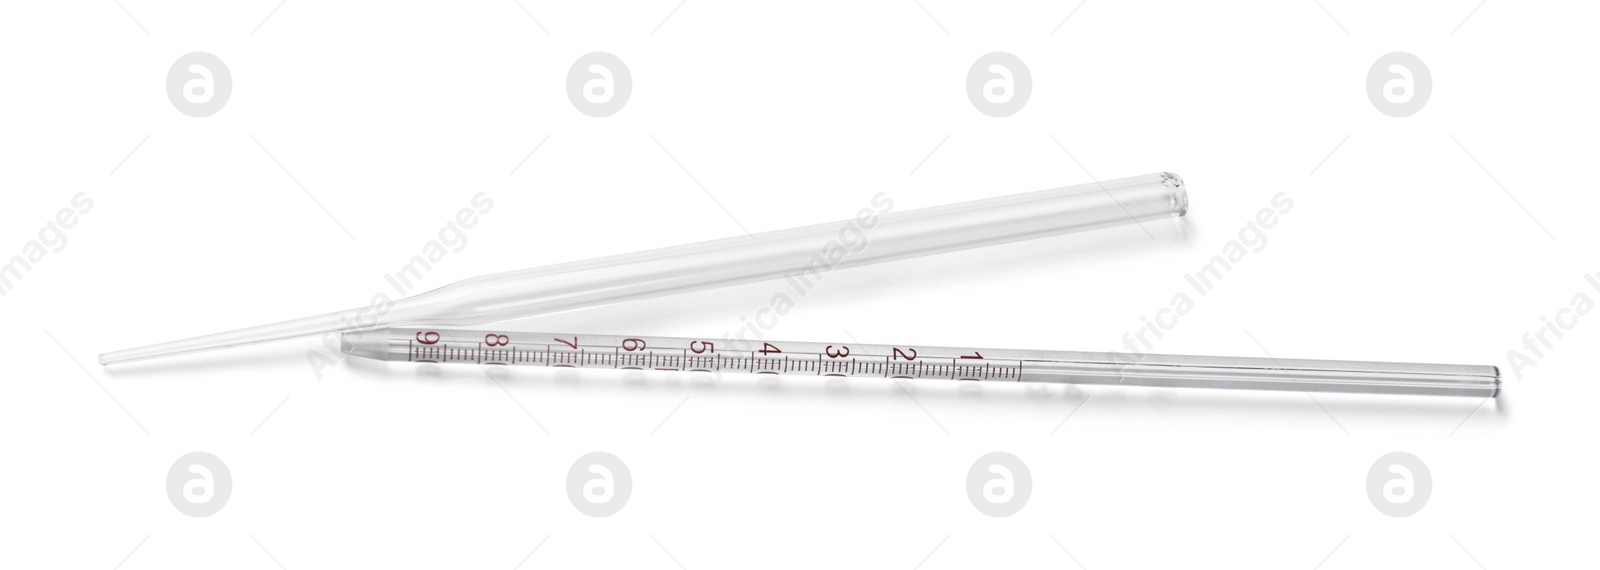 Photo of Two clean pipettes isolated on white, top view